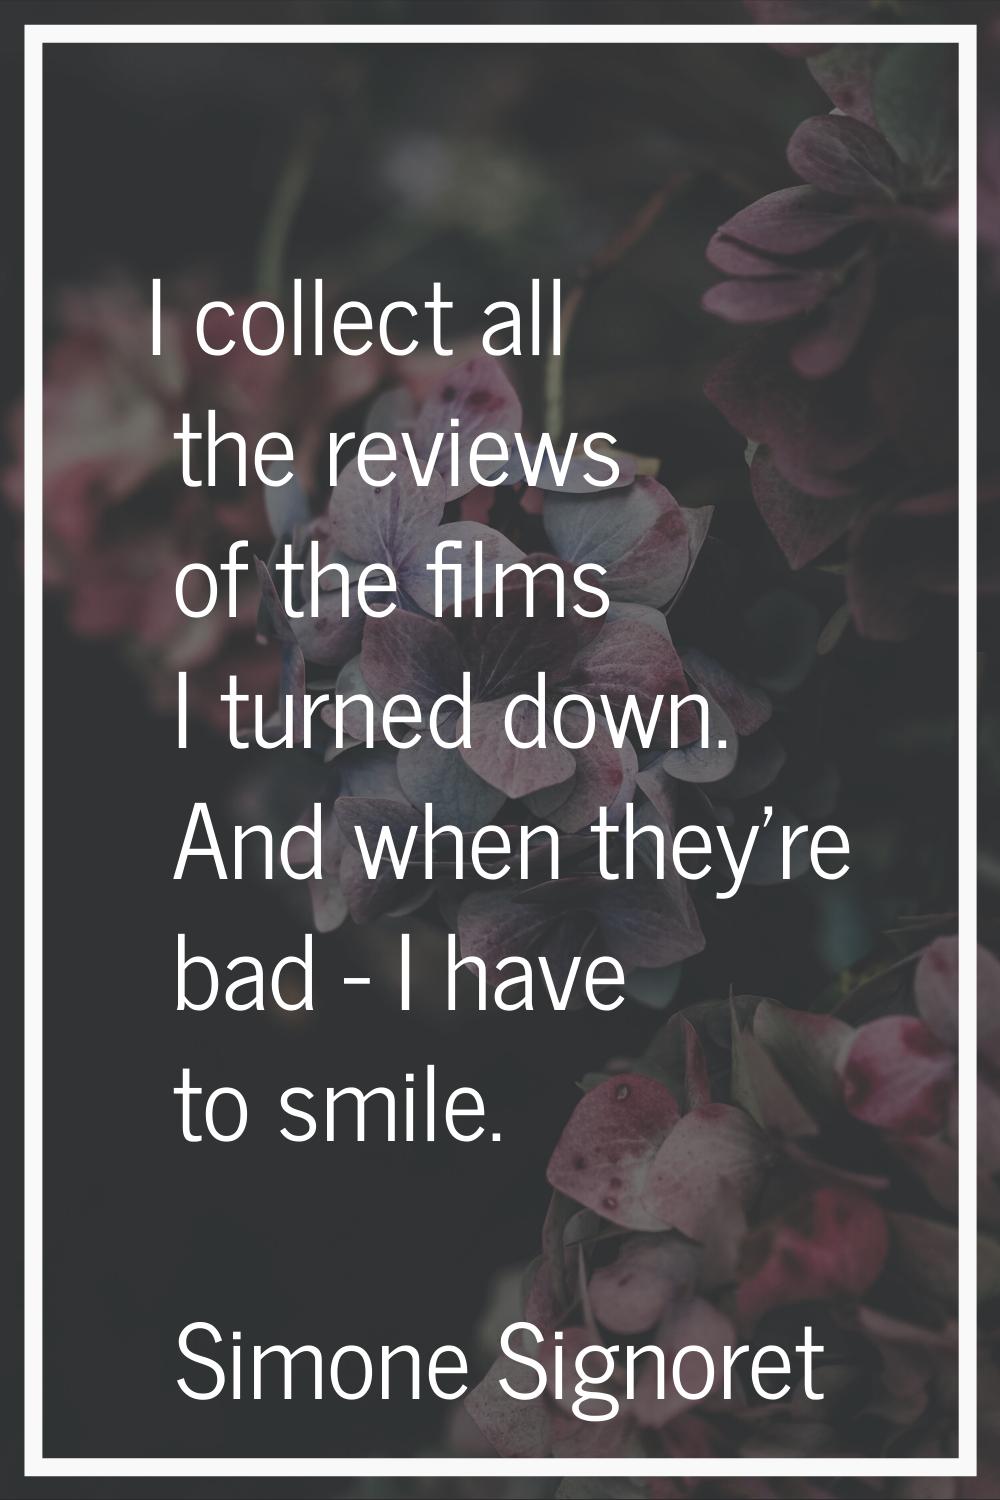 I collect all the reviews of the films I turned down. And when they're bad - I have to smile.